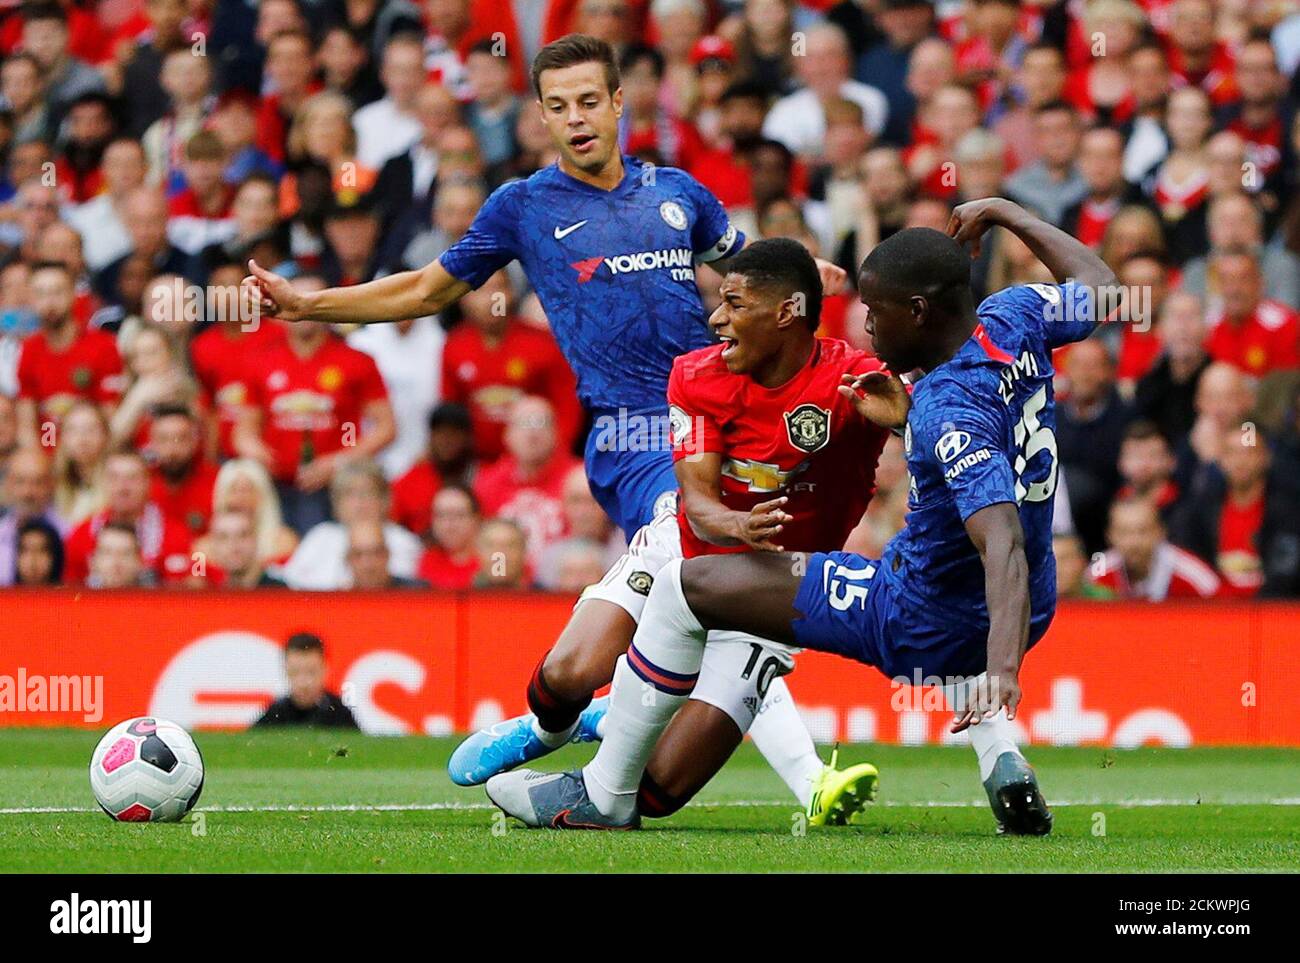 Soccer Football - Premier League - Manchester United v Chelsea - Old Trafford, Manchester, Britain - August 11, 2019  Manchester United are awarded a penalty after Marcus Rashford is fouled by Chelsea's Kurt Zouma   REUTERS/Phil Noble  EDITORIAL USE ONLY. No use with unauthorized audio, video, data, fixture lists, club/league logos or 'live' services. Online in-match use limited to 75 images, no video emulation. No use in betting, games or single club/league/player publications.  Please contact your account representative for further details. Stock Photo